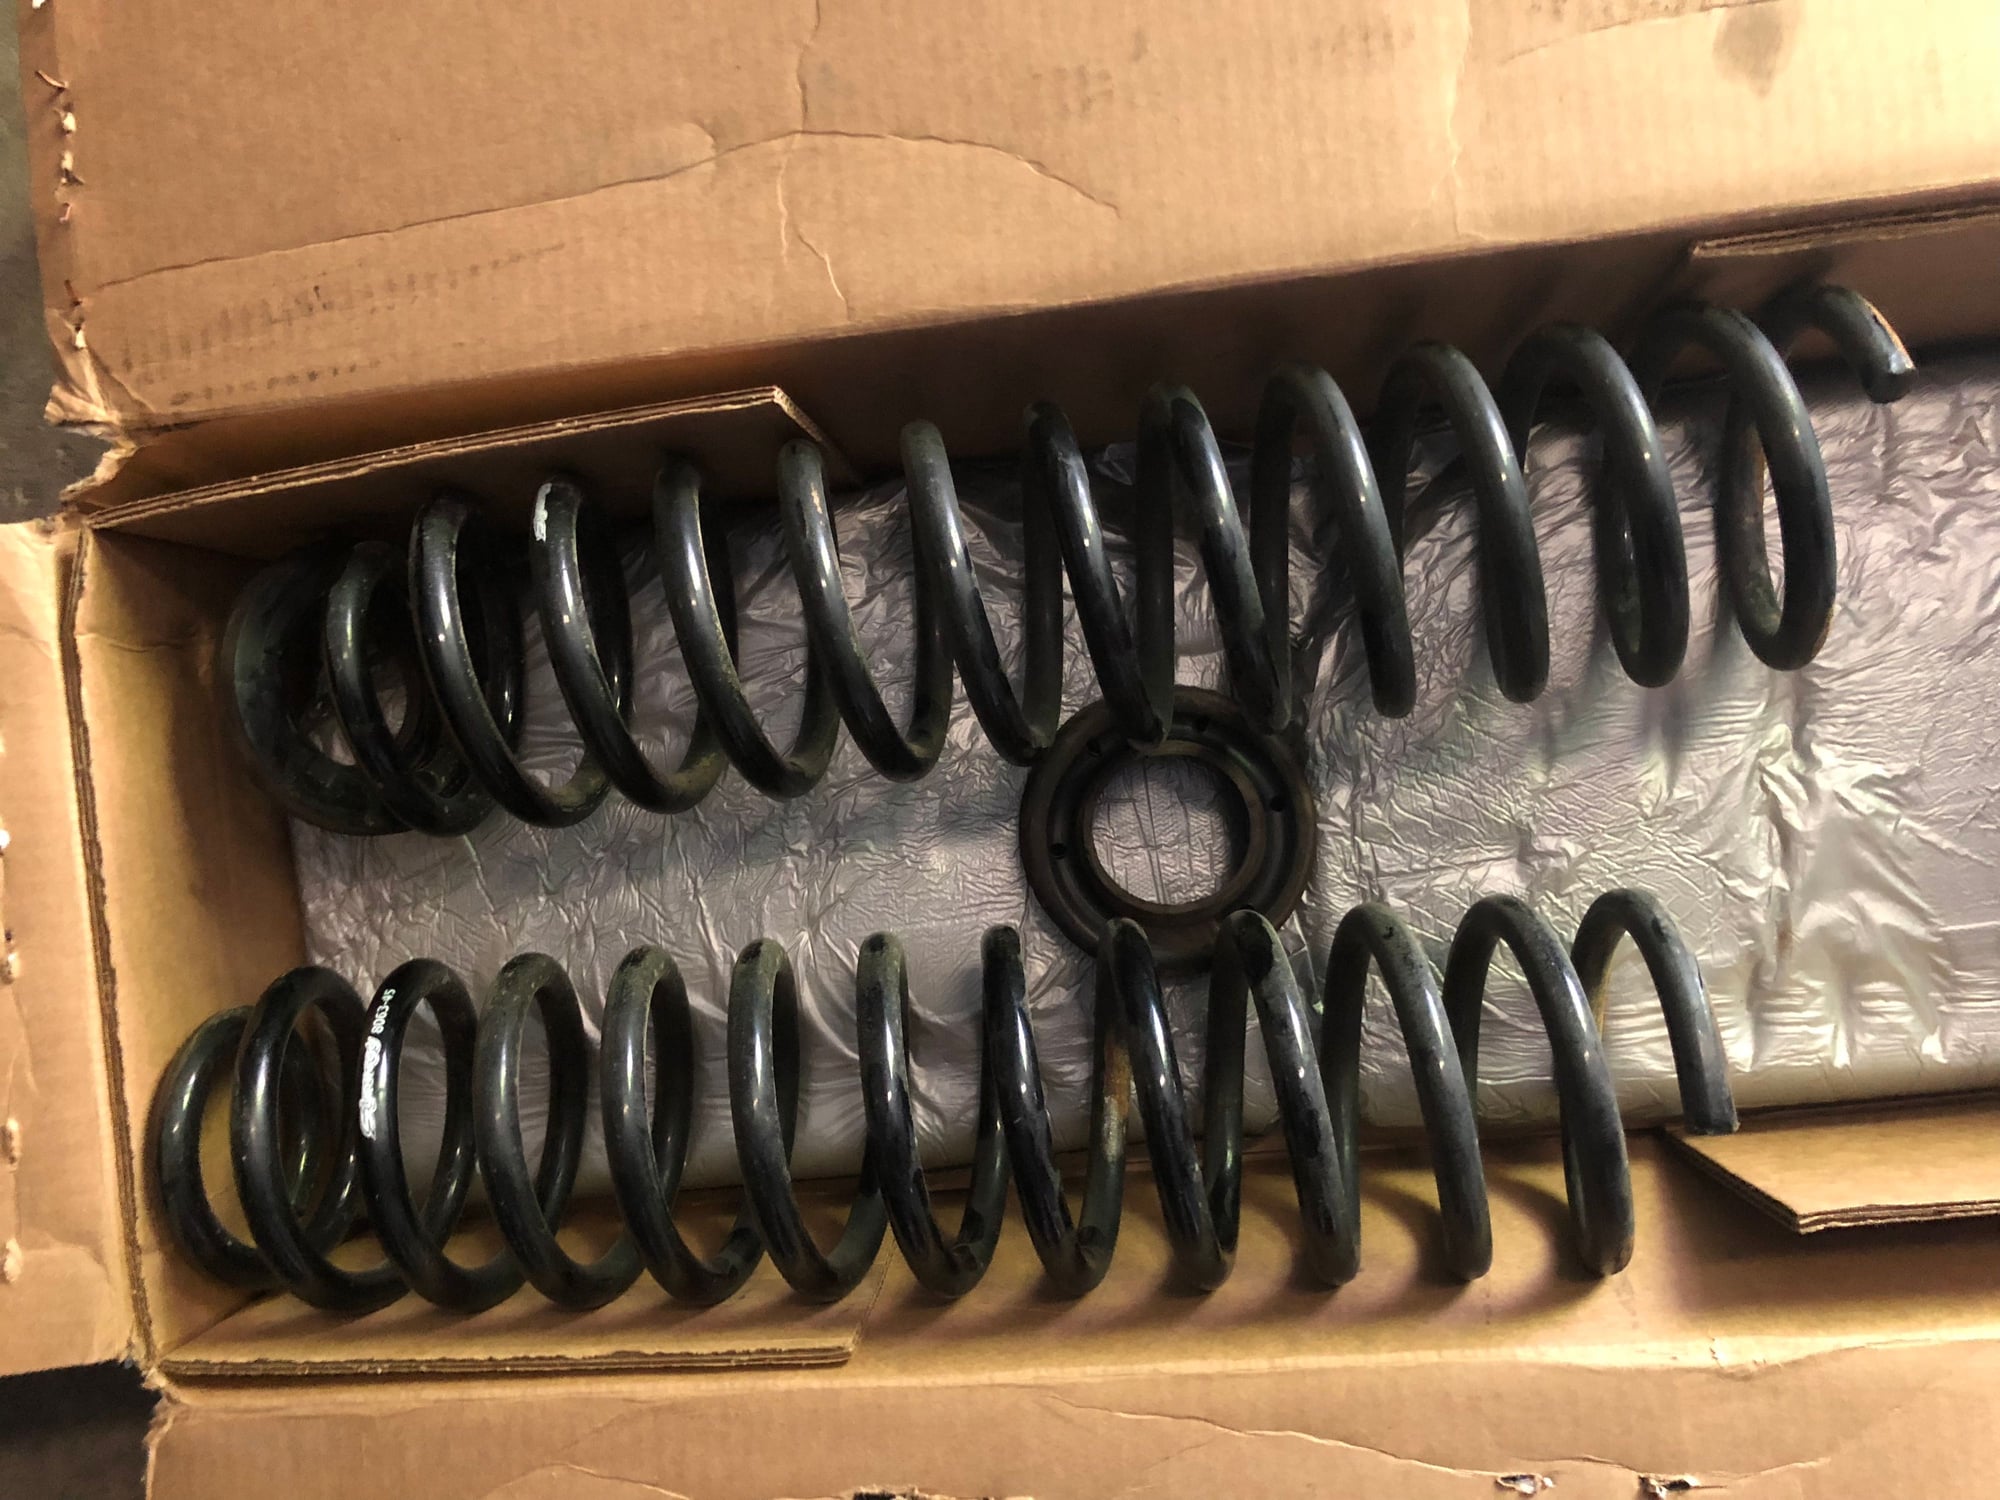 Steering/Suspension - fox shocks and synergy springs - Used - All Years Jeep Wrangler - Chatsworth, CA 91311, United States